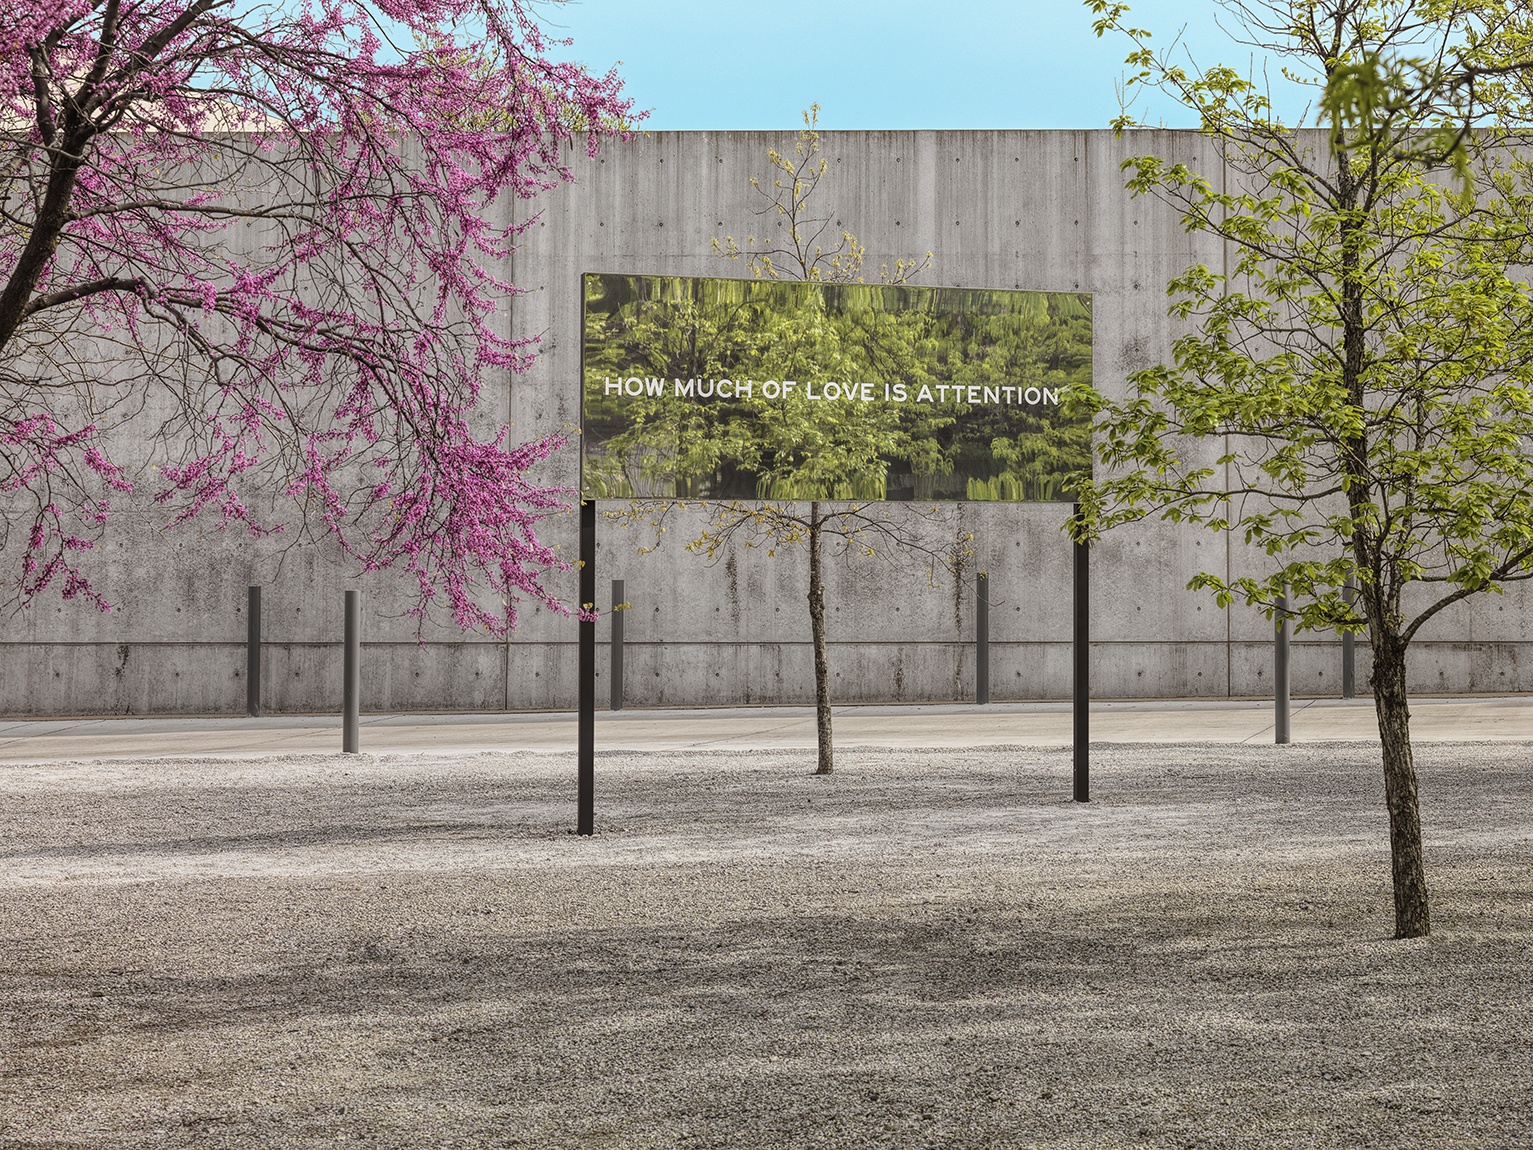 A mirrored billboard work with text by Chloë Bass installed outdoors in the tree grove behind the museum